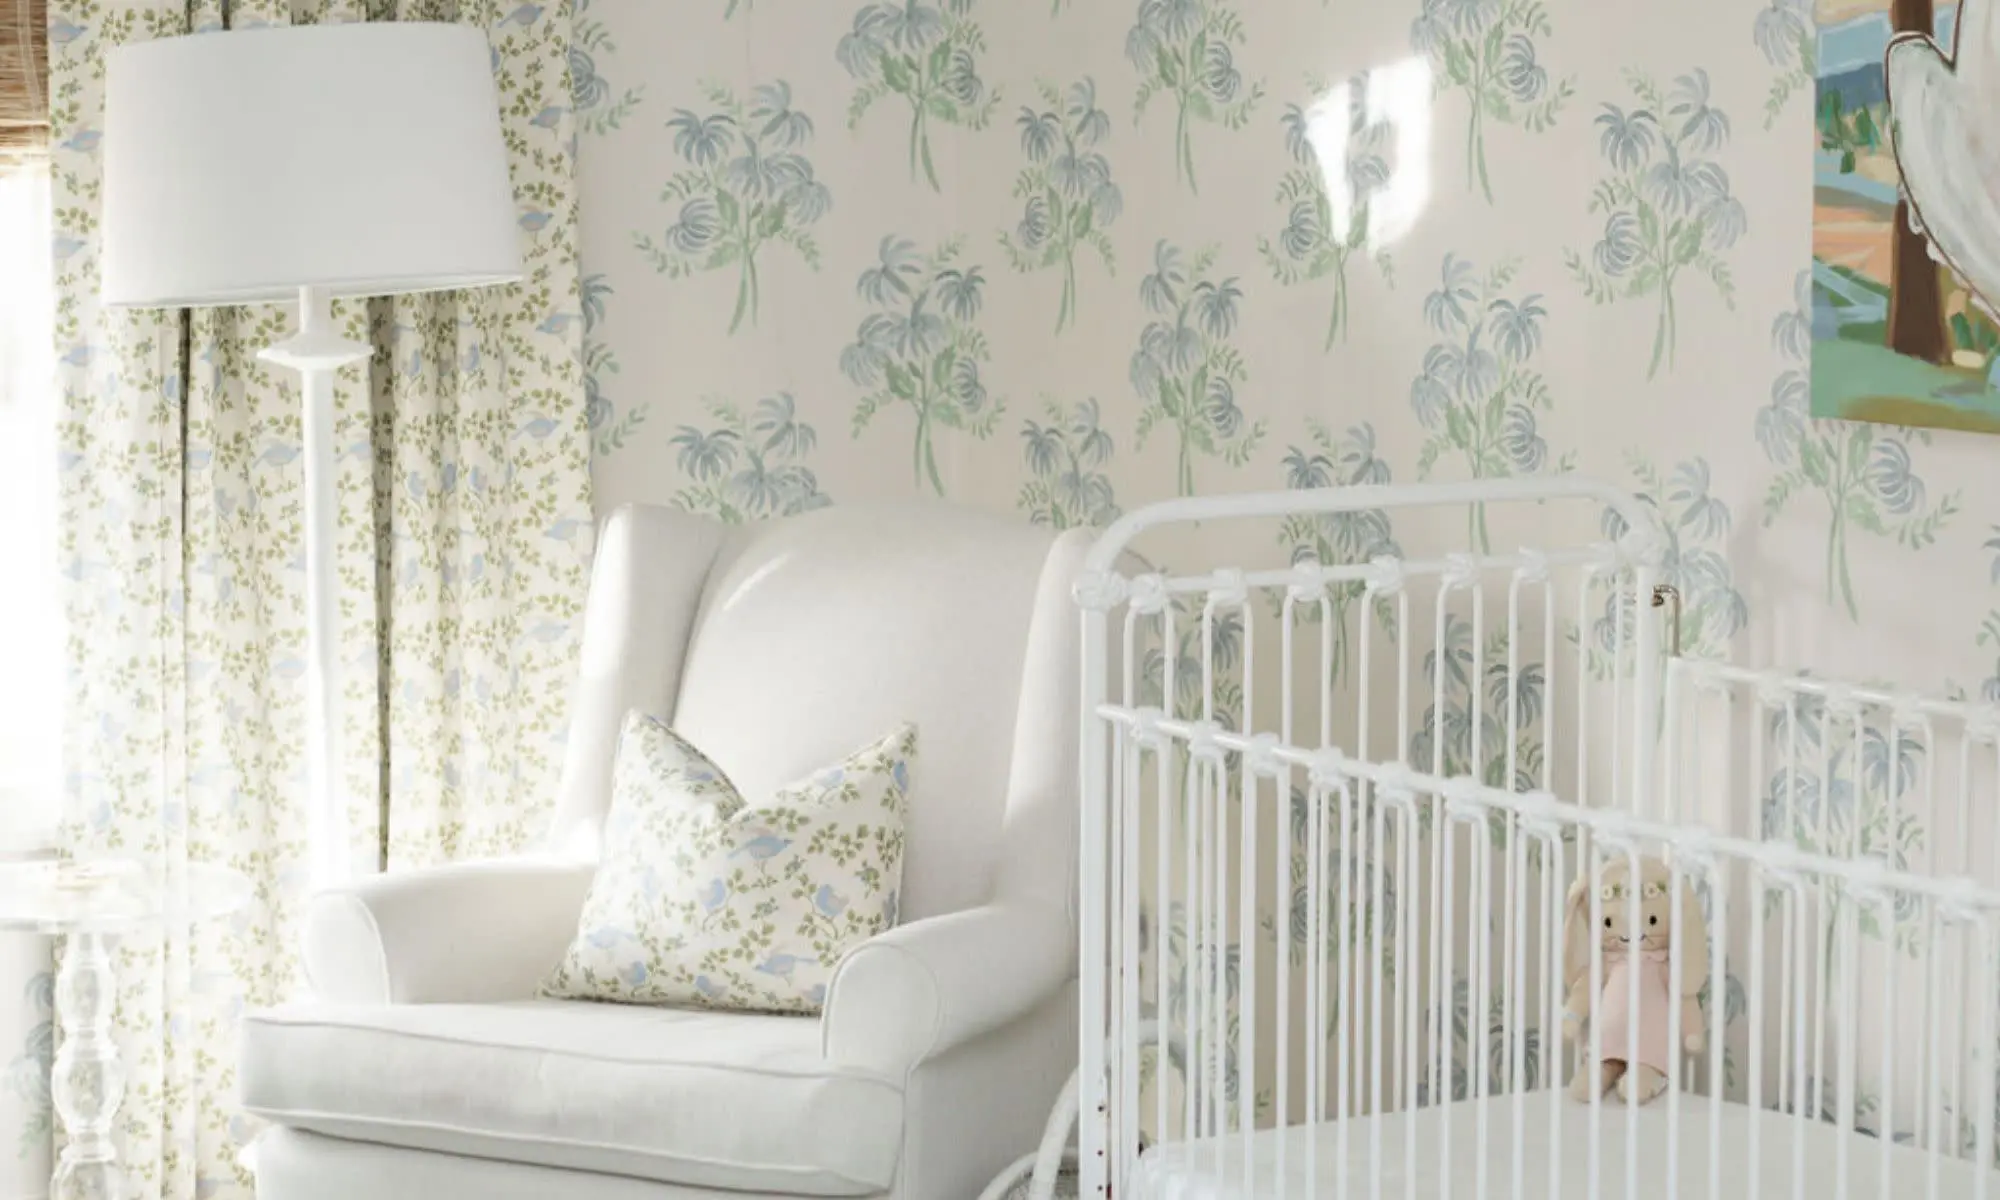 Nursery with floral wallpaper